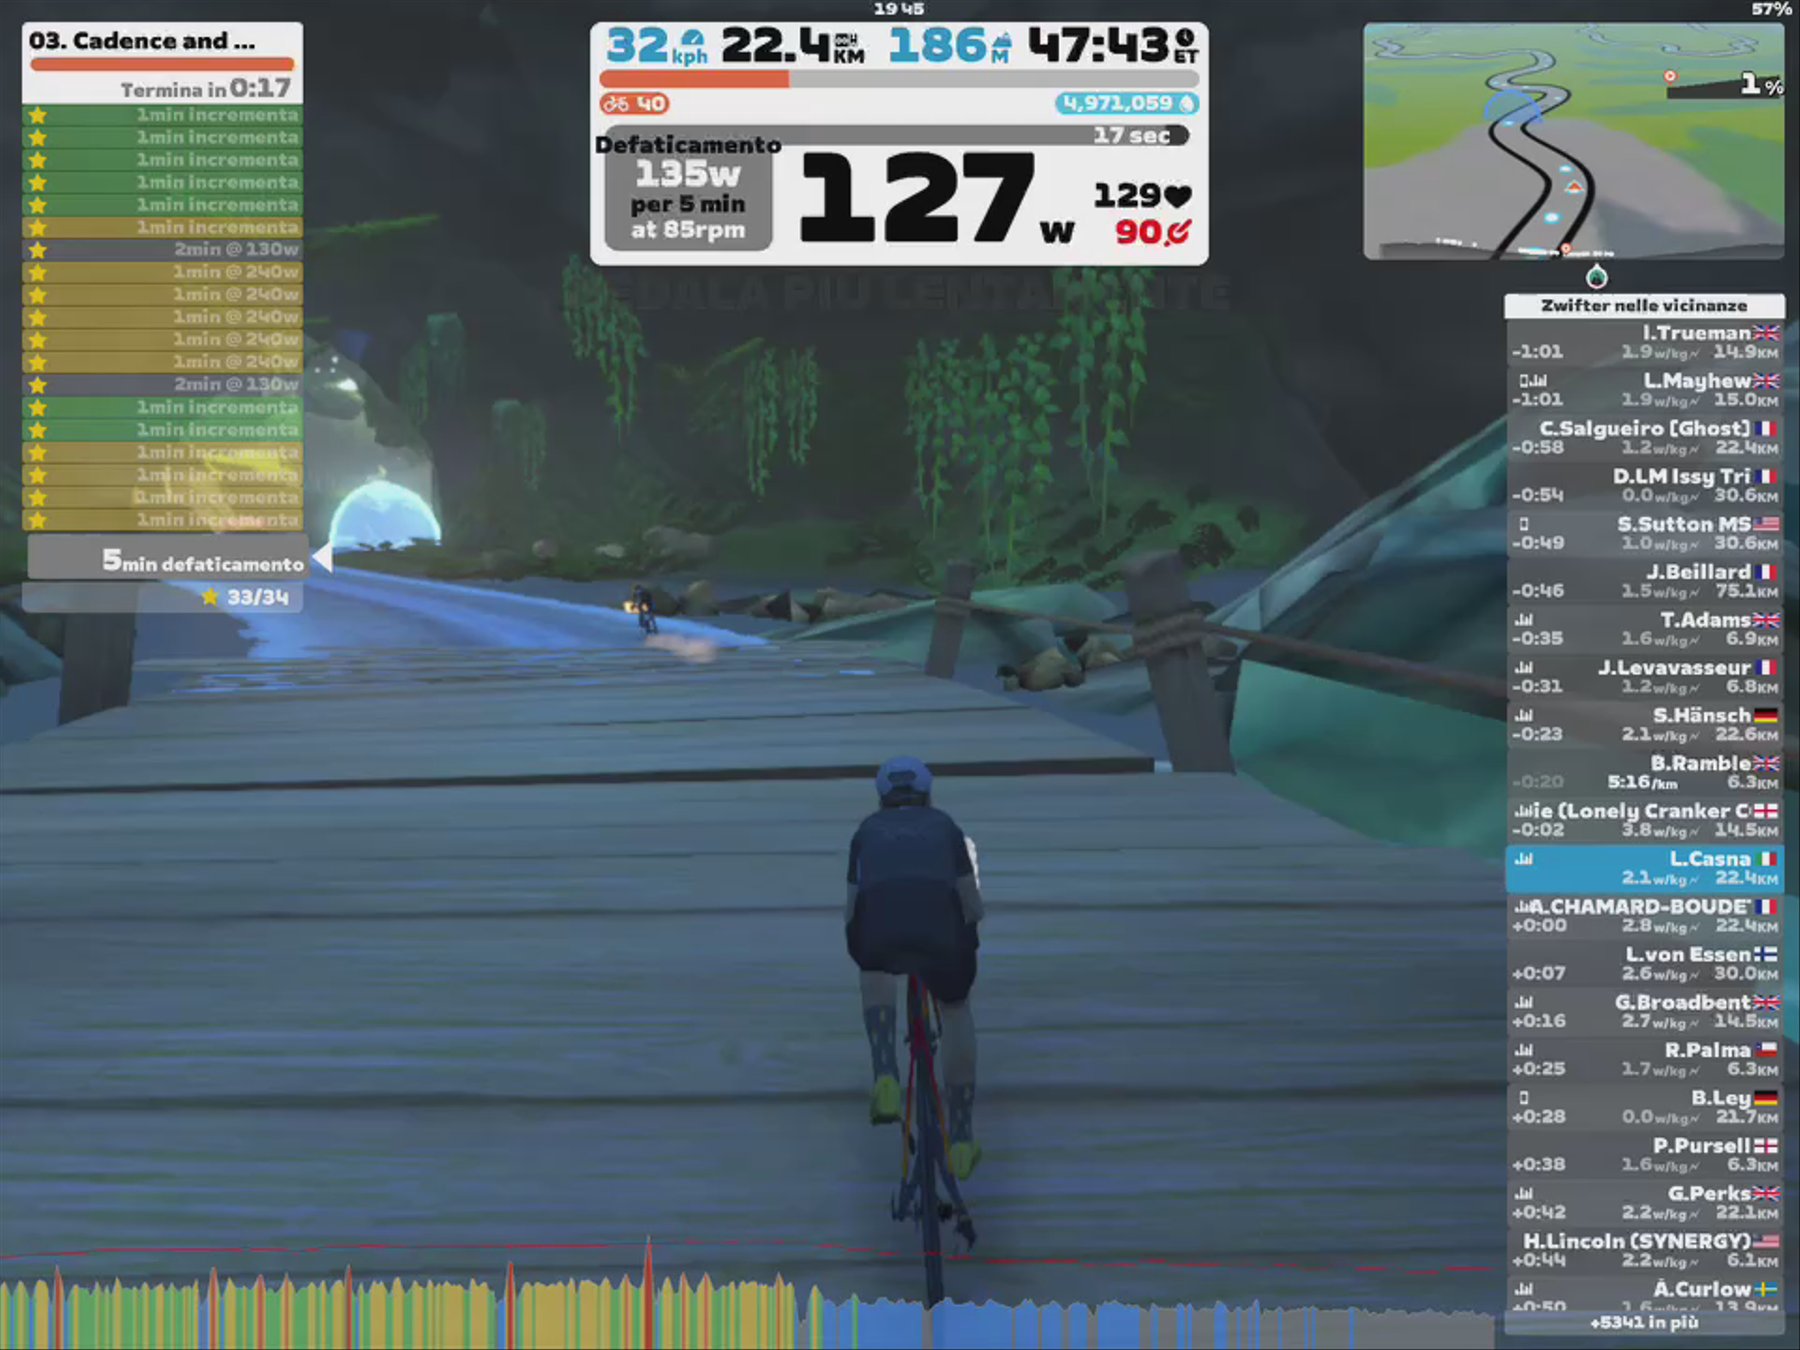 Zwift - 03. Cadence and Cruise in Watopia